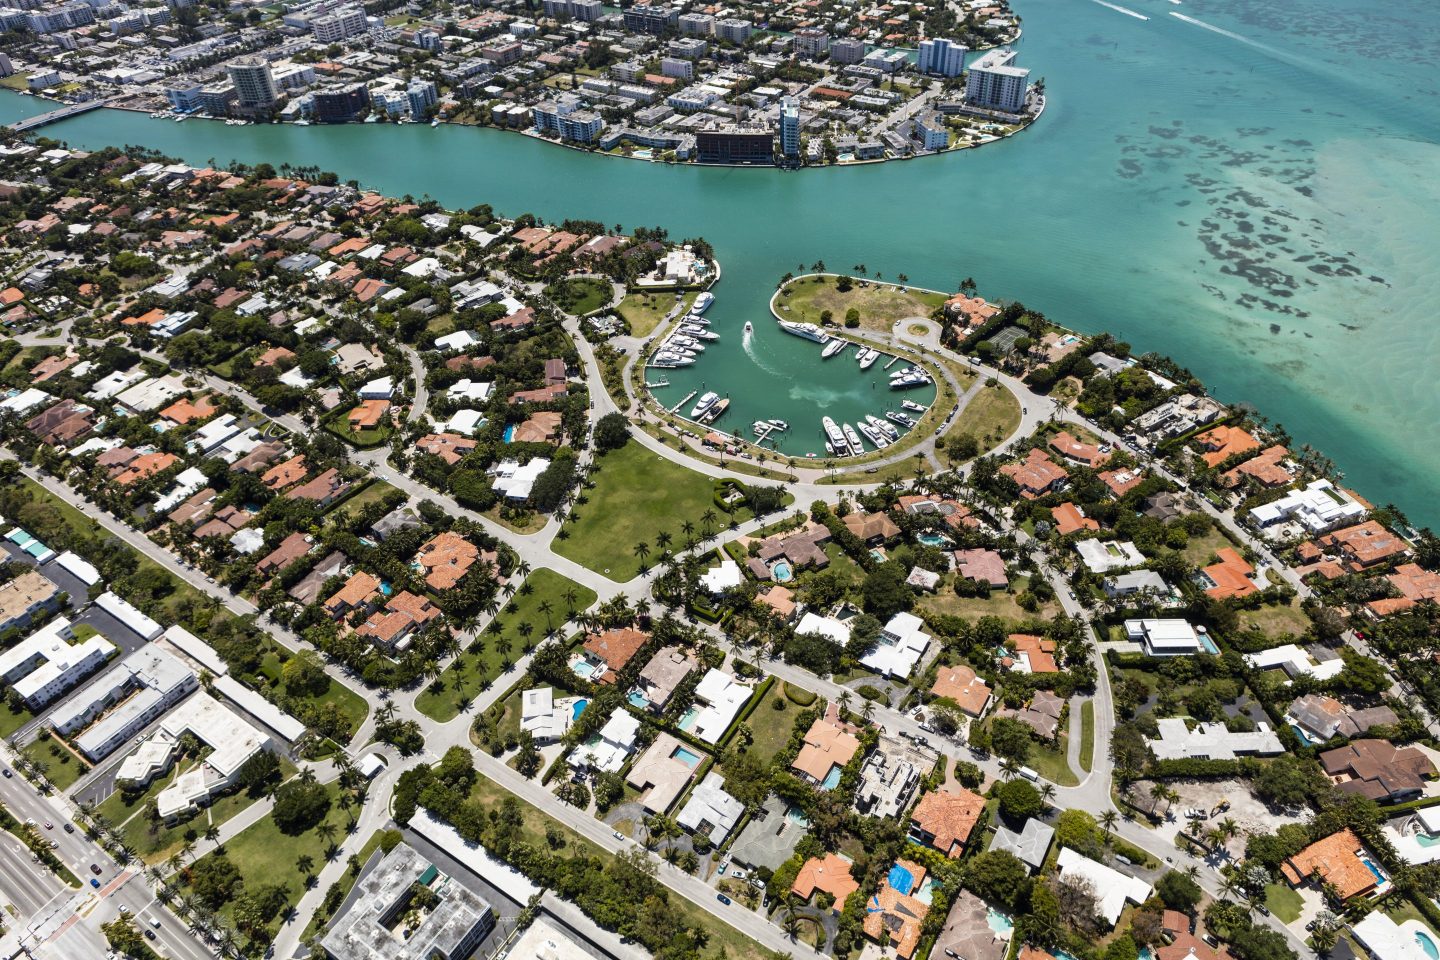 Aerial view of houses, hotels, buildings, boats, marina, and Indian Creek in South Beach Miami